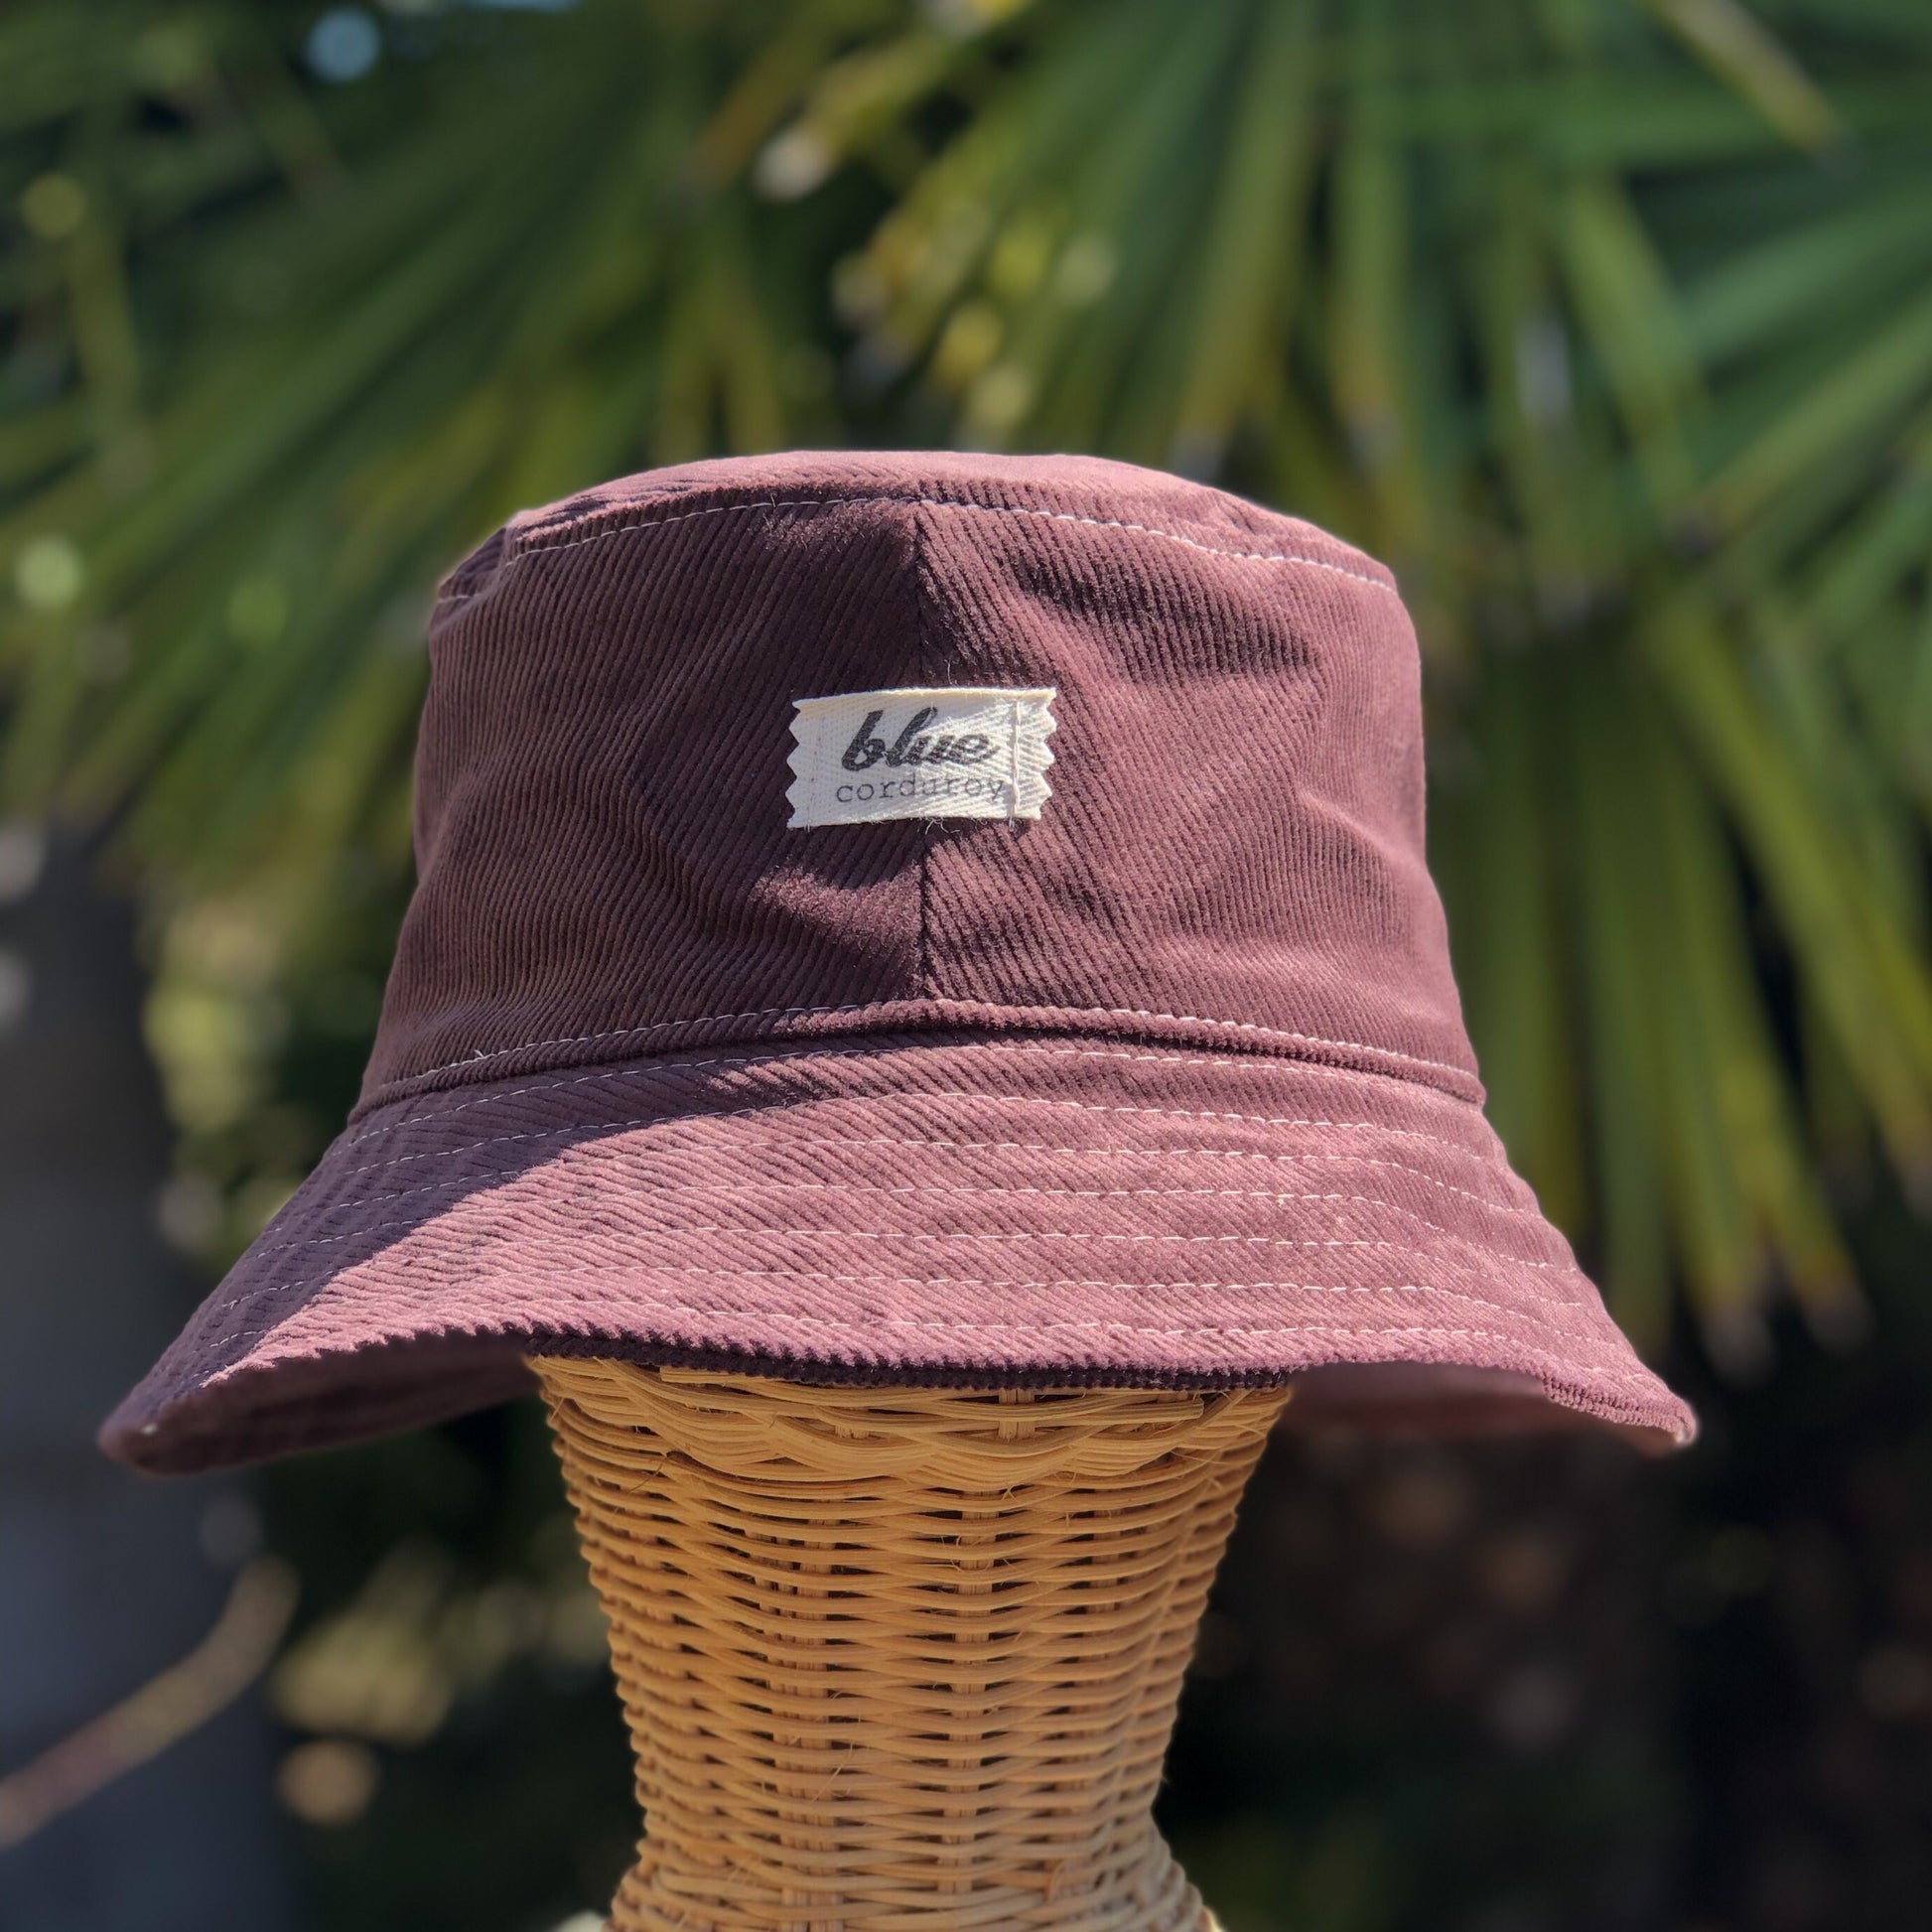 Matching Bucket Hats, Mommy and Me Matching Hats, Baby Bucket Hat, Brown Corduroy Hat, Father and Son Sun Hats, Fall Family Style